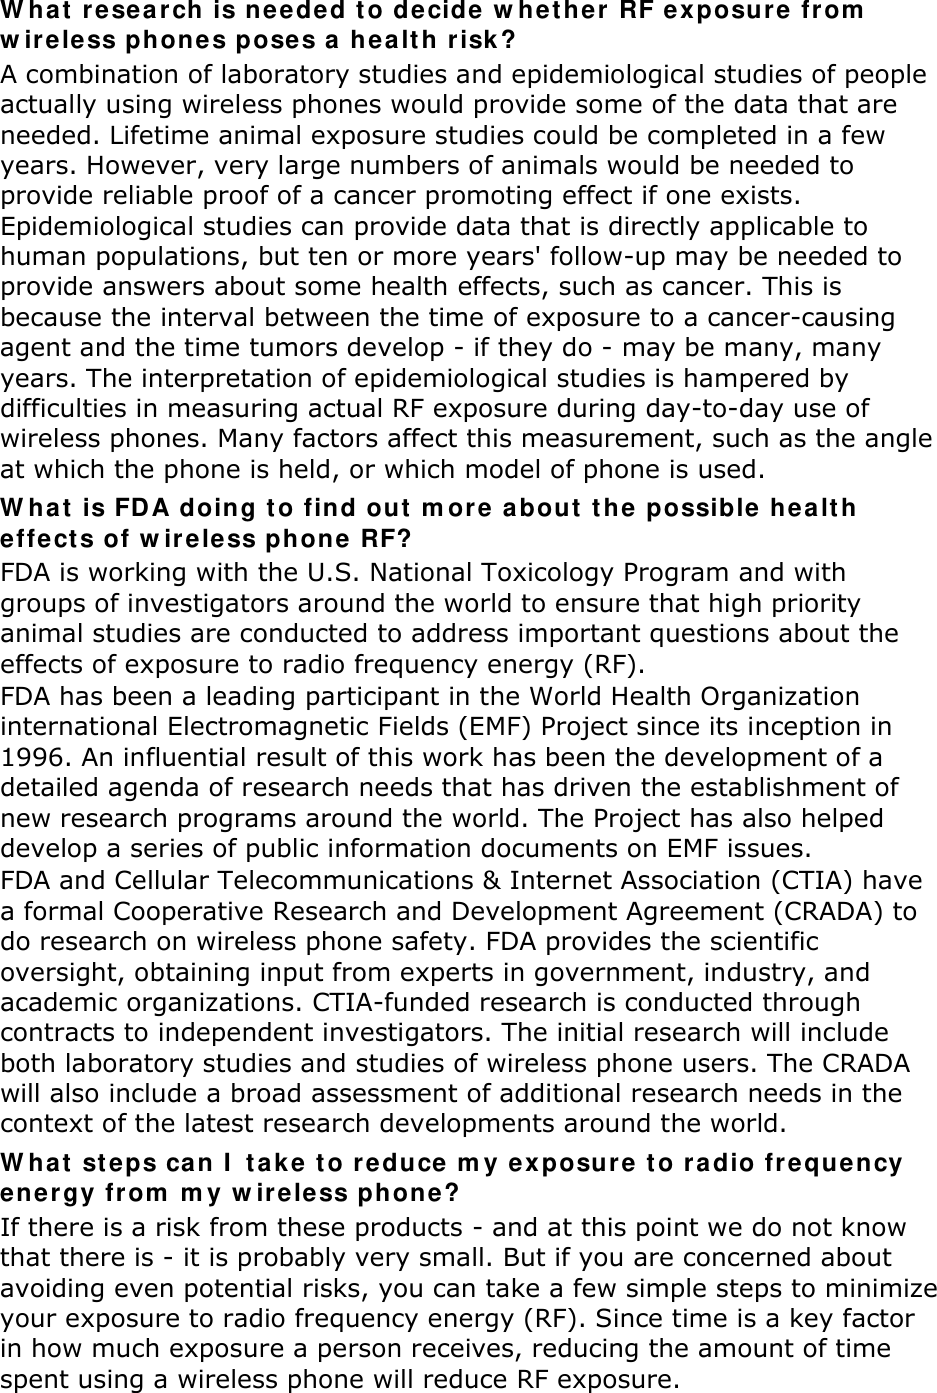 W ha t  resear ch is neede d t o de cide w hether RF exposure  fr om  w ireless phones poses a h ea lt h risk ? A combination of laboratory studies and epidemiological studies of people actually using wireless phones would provide some of the data that are needed. Lifetime animal exposure studies could be completed in a few years. However, very large numbers of animals would be needed to provide reliable proof of a cancer promoting effect if one exists. Epidemiological studies can provide data that is directly applicable to human populations, but ten or more years&apos; follow-up may be needed to provide answers about some health effects, such as cancer. This is because the interval between the time of exposure to a cancer-causing agent and the time tumors develop - if they do - may be many, many years. The interpretation of epidemiological studies is hampered by difficulties in measuring actual RF exposure during day-to-day use of wireless phones. Many factors affect this measurement, such as the angle at which the phone is held, or which model of phone is used. W hat  is FDA doing t o find out  m ore a bout  t he  possible hea lt h  effe ct s of w ir eless phone RF? FDA is working with the U.S. National Toxicology Program and with groups of investigators around the world to ensure that high priority animal studies are conducted to address important questions about the effects of exposure to radio frequency energy (RF). FDA has been a leading participant in the World Health Organization international Electromagnetic Fields (EMF) Project since its inception in 1996. An influential result of this work has been the development of a detailed agenda of research needs that has driven the establishment of new research programs around the world. The Project has also helped develop a series of public information documents on EMF issues. FDA and Cellular Telecommunications &amp; Internet Association (CTIA) have a formal Cooperative Research and Development Agreement (CRADA) to do research on wireless phone safety. FDA provides the scientific oversight, obtaining input from experts in government, industry, and academic organizations. CTIA-funded research is conducted through contracts to independent investigators. The initial research will include both laboratory studies and studies of wireless phone users. The CRADA will also include a broad assessment of additional research needs in the context of the latest research developments around the world. W hat  st eps ca n I  t a ke t o r educe m y exposure t o ra dio fr equency ener gy fr om  m y w ir eless phone? If there is a risk from these products - and at this point we do not know that there is - it is probably very small. But if you are concerned about avoiding even potential risks, you can take a few simple steps to minimize your exposure to radio frequency energy (RF). Since time is a key factor in how much exposure a person receives, reducing the amount of time spent using a wireless phone will reduce RF exposure. 